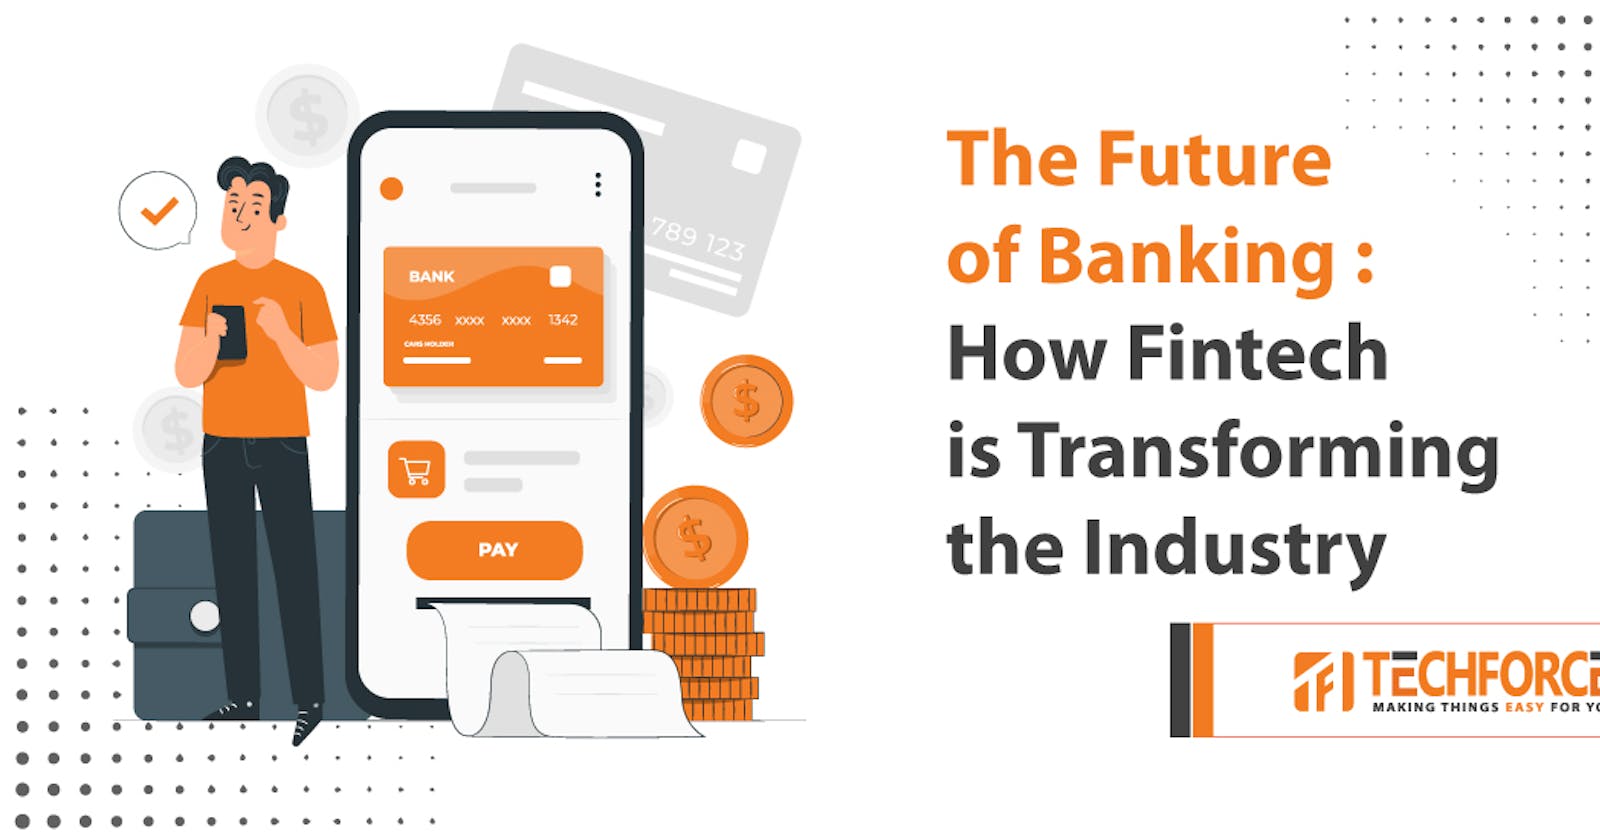 The Rise of Fintech: How Embedded Finance Is Disrupting Banking!